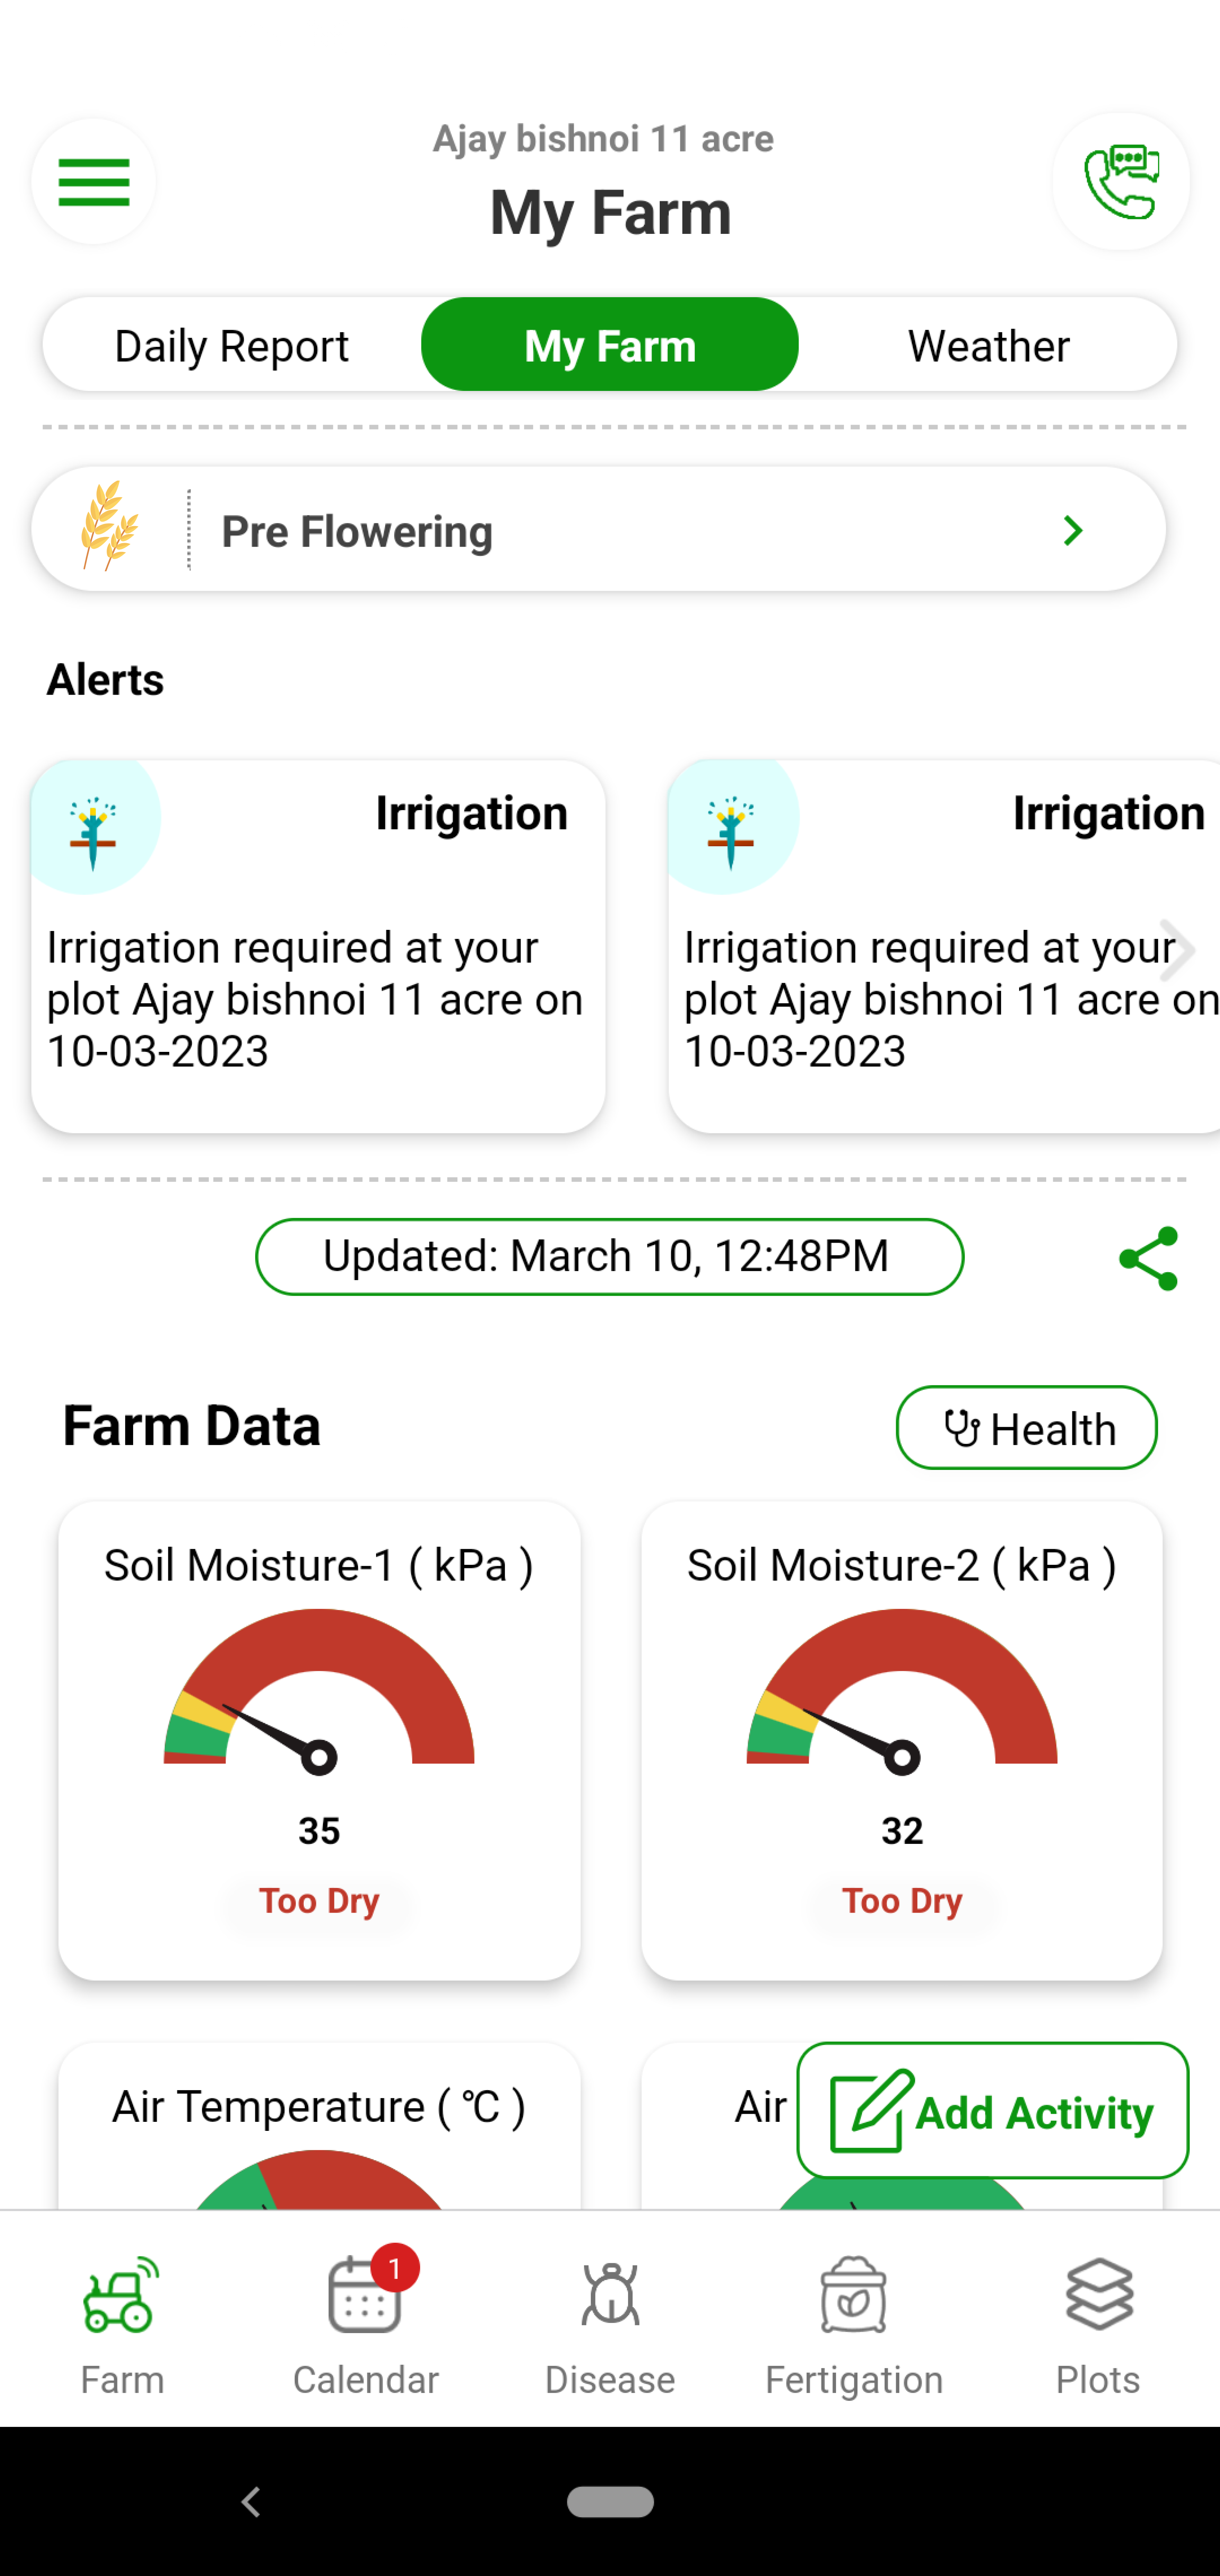 Keeping soils properly irrigated is very important for wheat. Under irrigation can hamper the grain size and quality. Over irrigation leads to wilting in the plants. Wheat’s water requirements vary based on soil type and stage. With Fyllo’s device containing soil moisture and soil temperature sensor and intelligent software, you get alerts on how much water to provide to the crop. You can also see and visualize evapotranspiration (Etc) values of the crop. You can perfectly manage the water requirements to get the perfect size, color and sugar